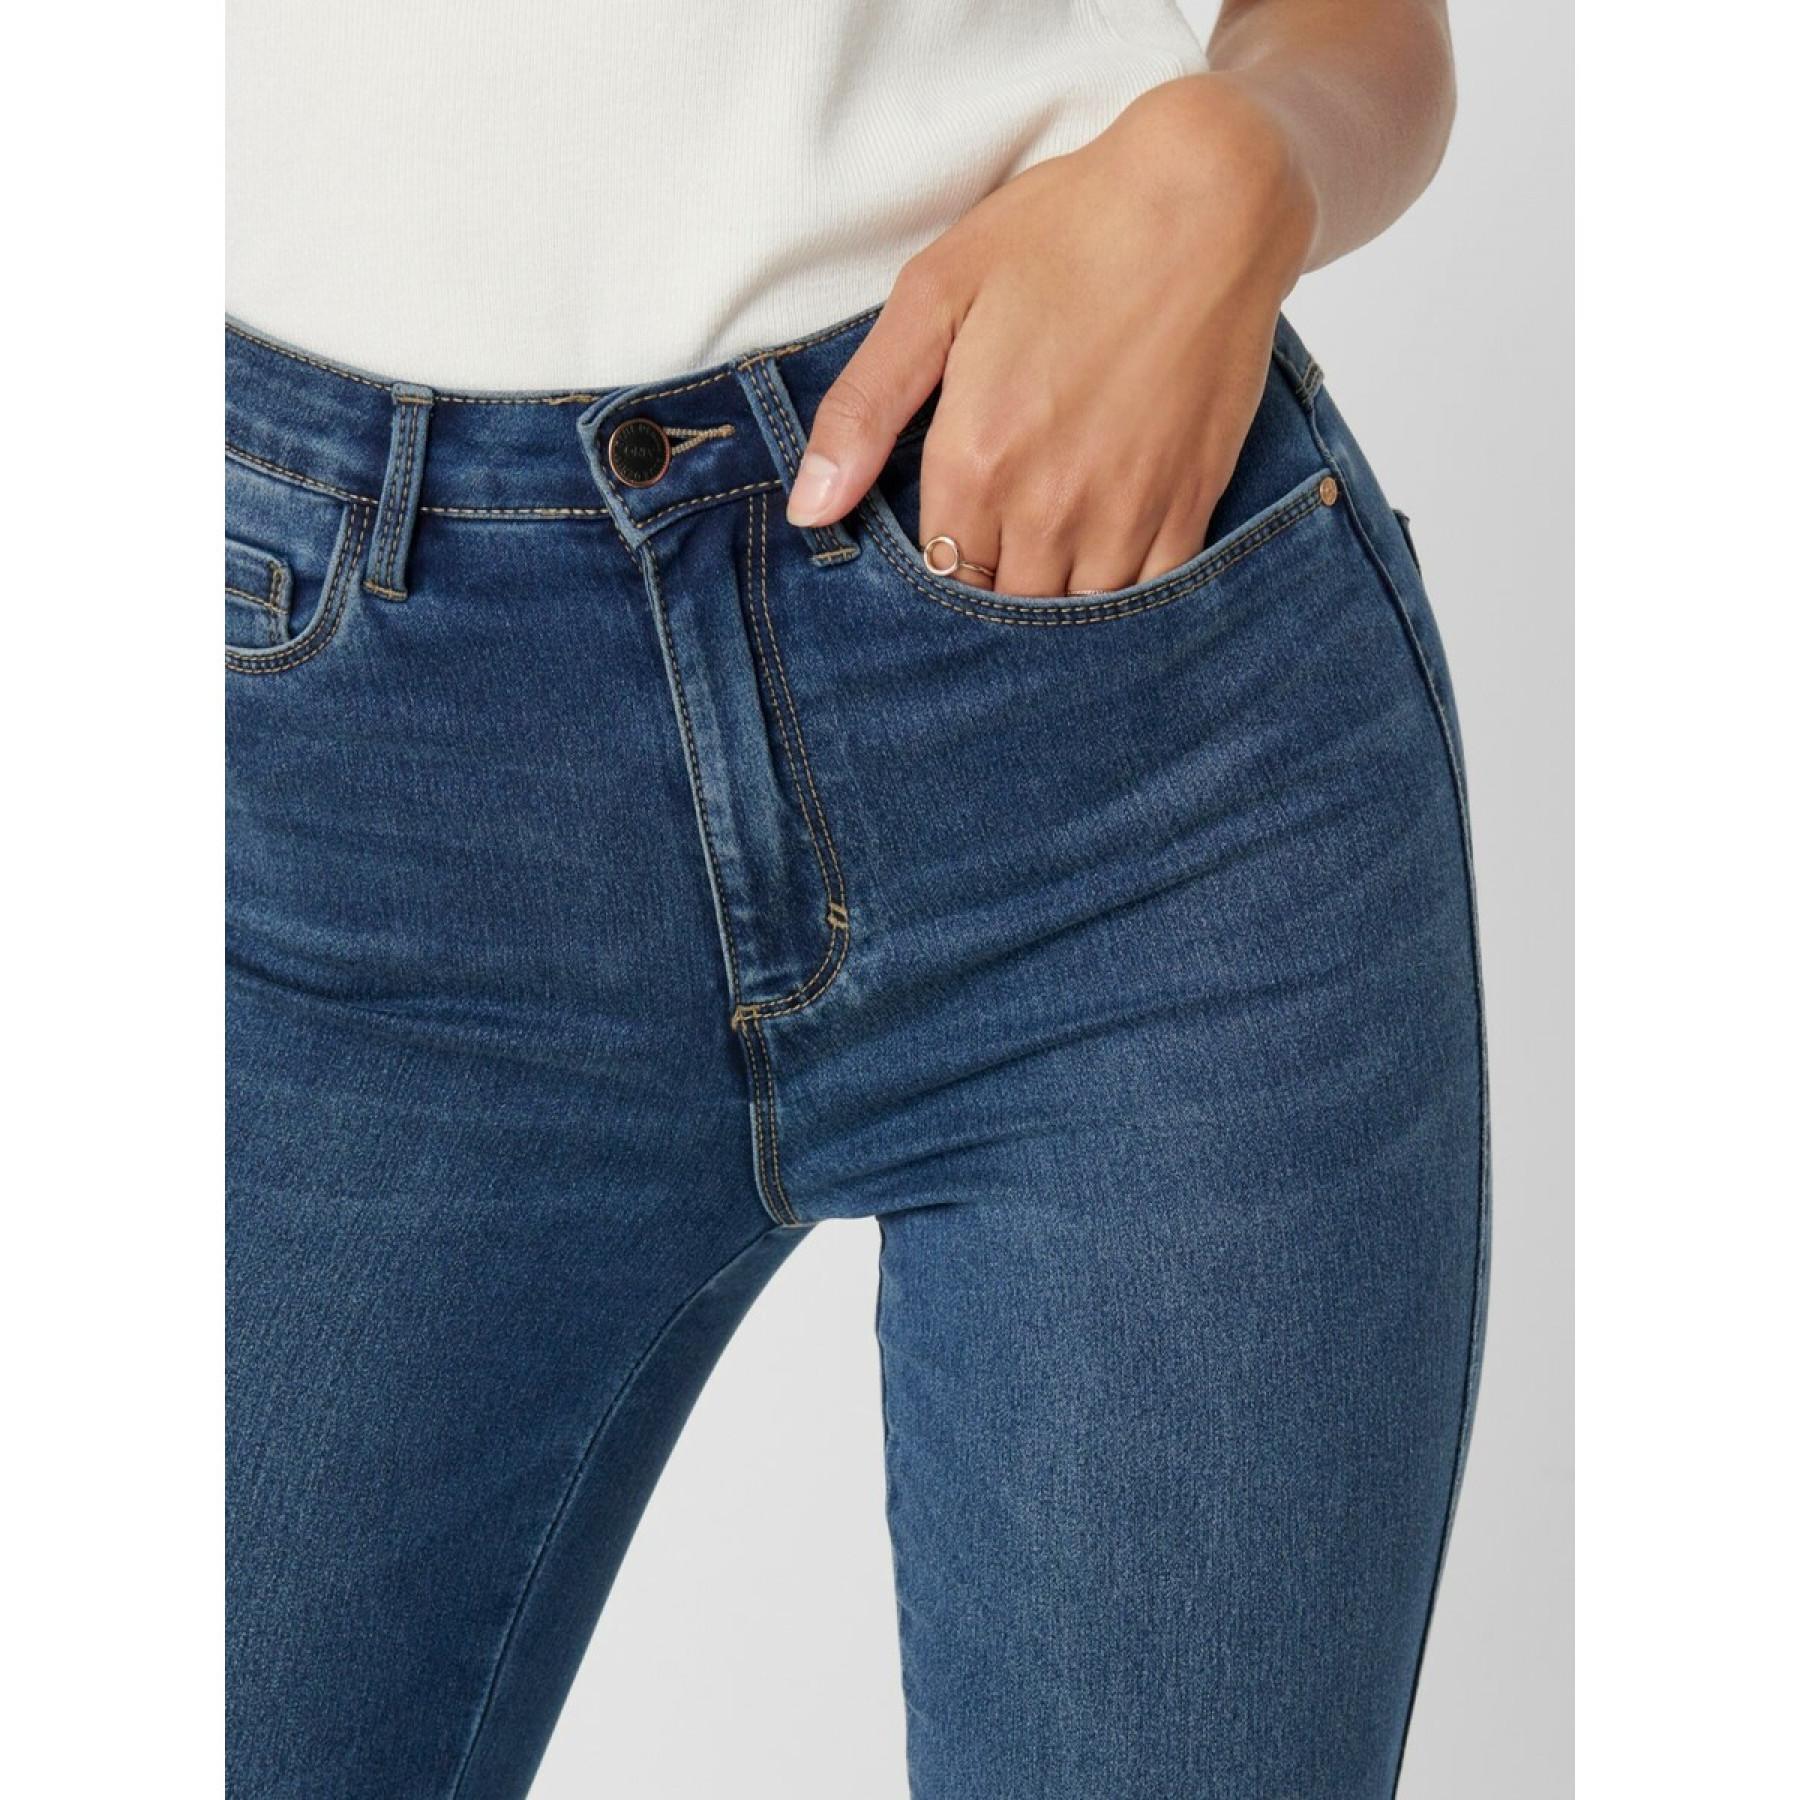 Women's jeans Only Royal life skinny